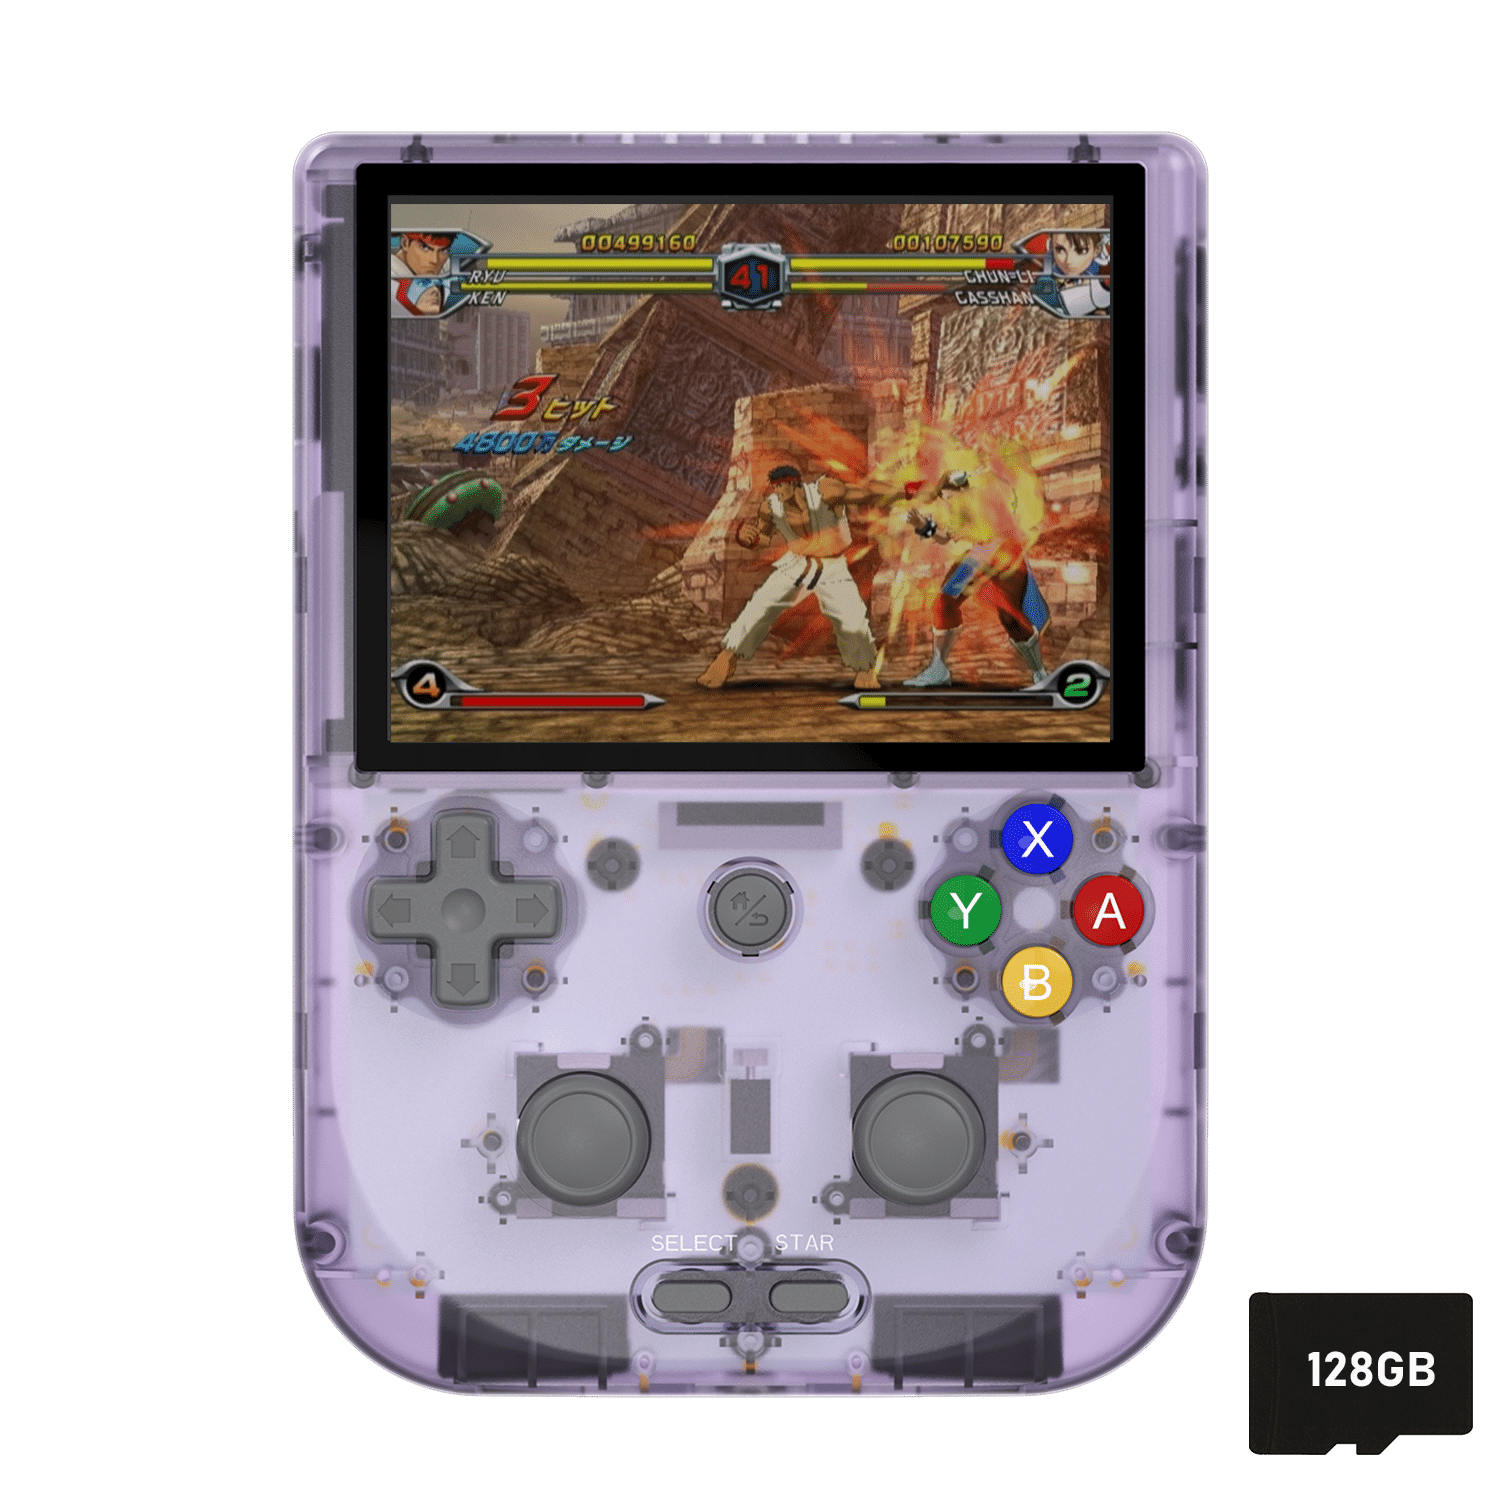 Anbernic RG405V Review - Larger than life Android retro gaming handheld -  DroiX Blogs